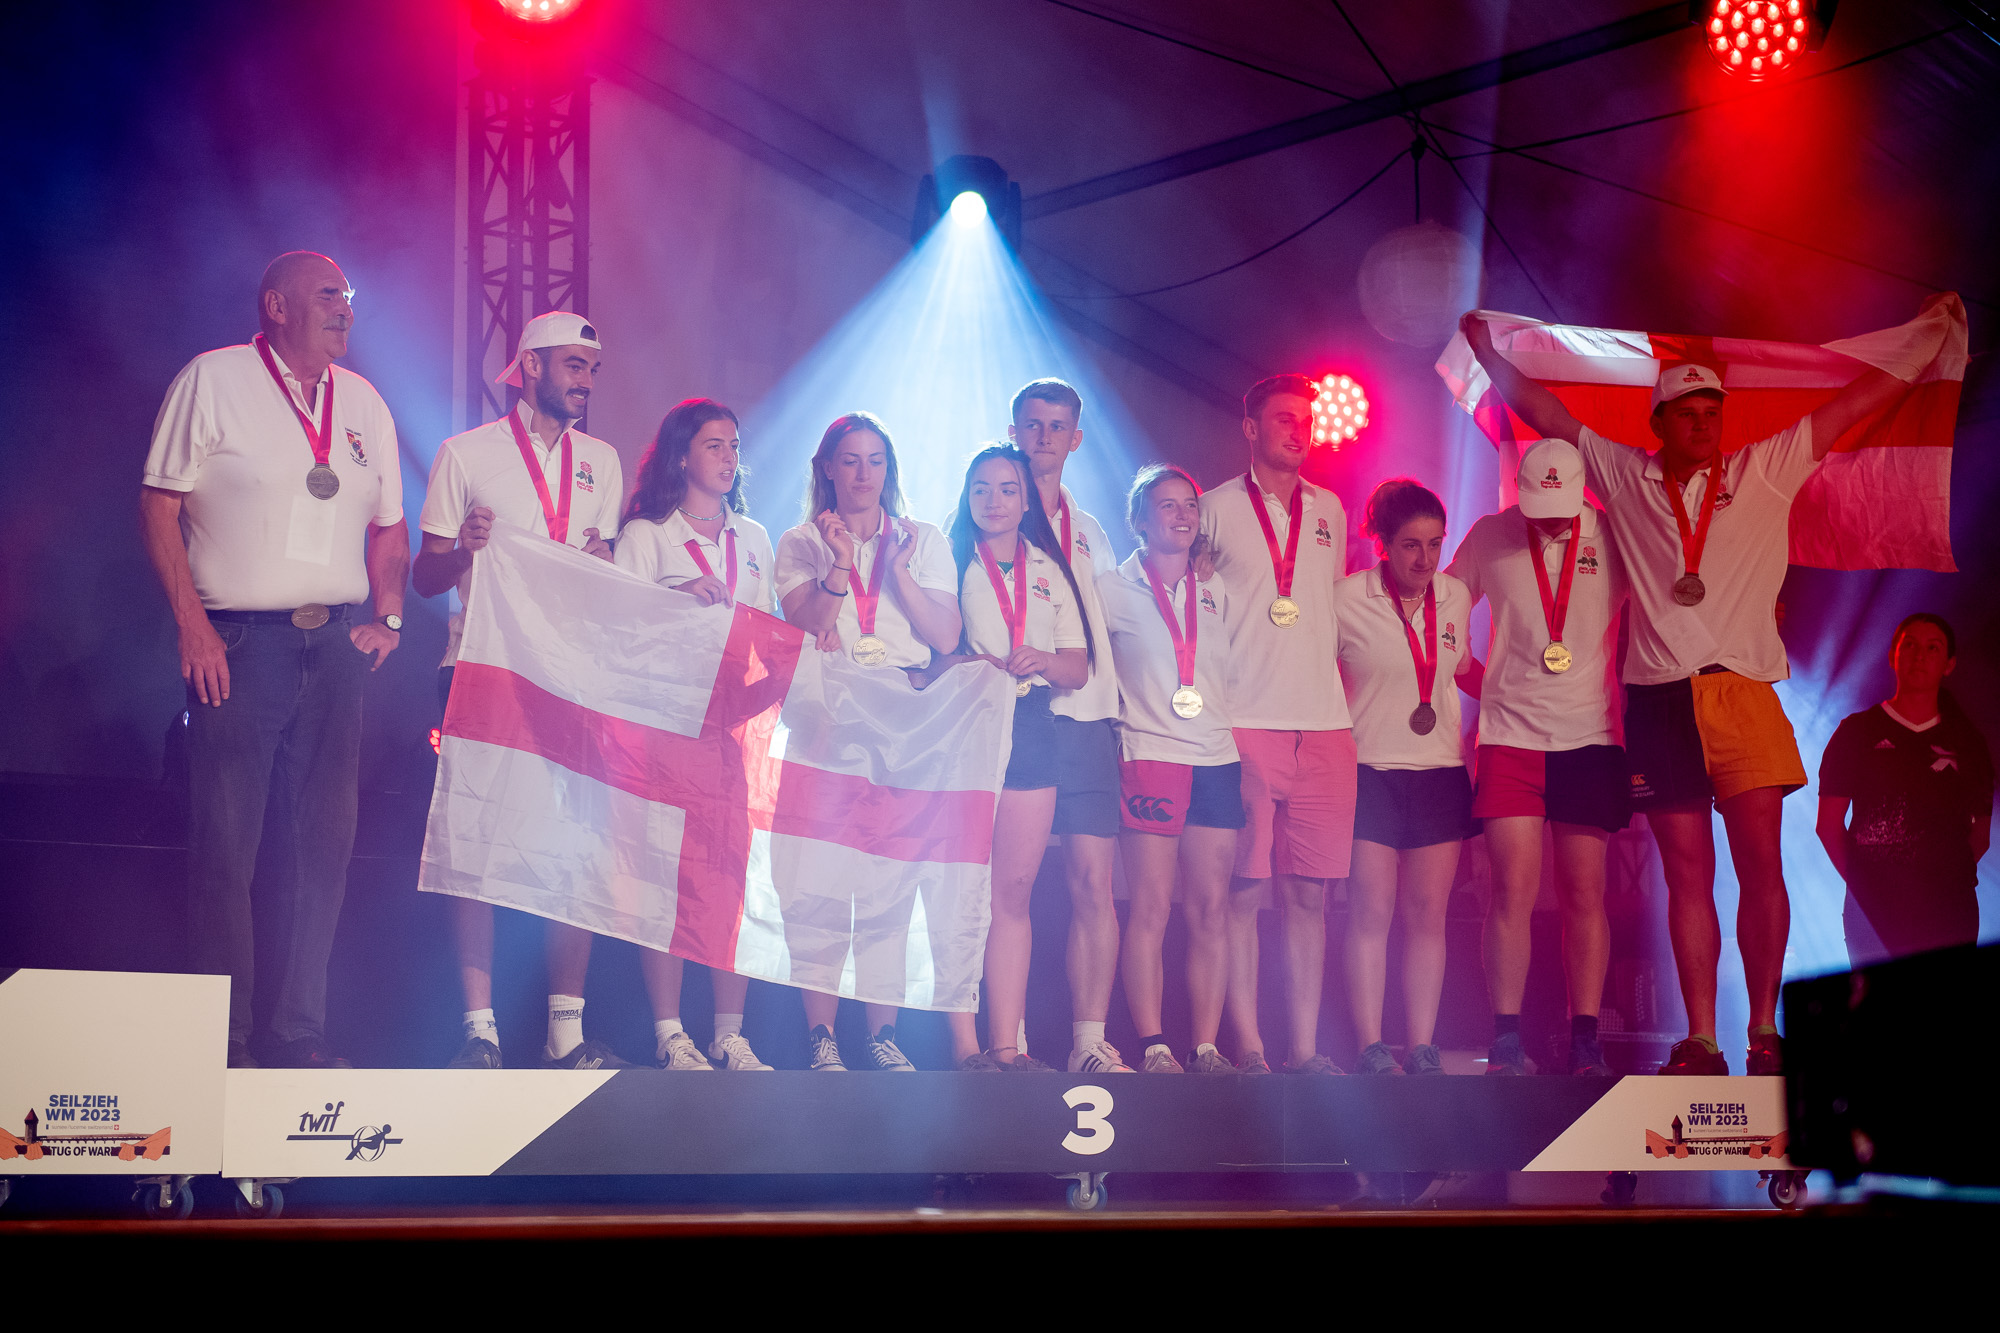 England Under 23 Mixed 560kg Team on the Podium Collecting Their Medals. Image Credit Tug of War 2023